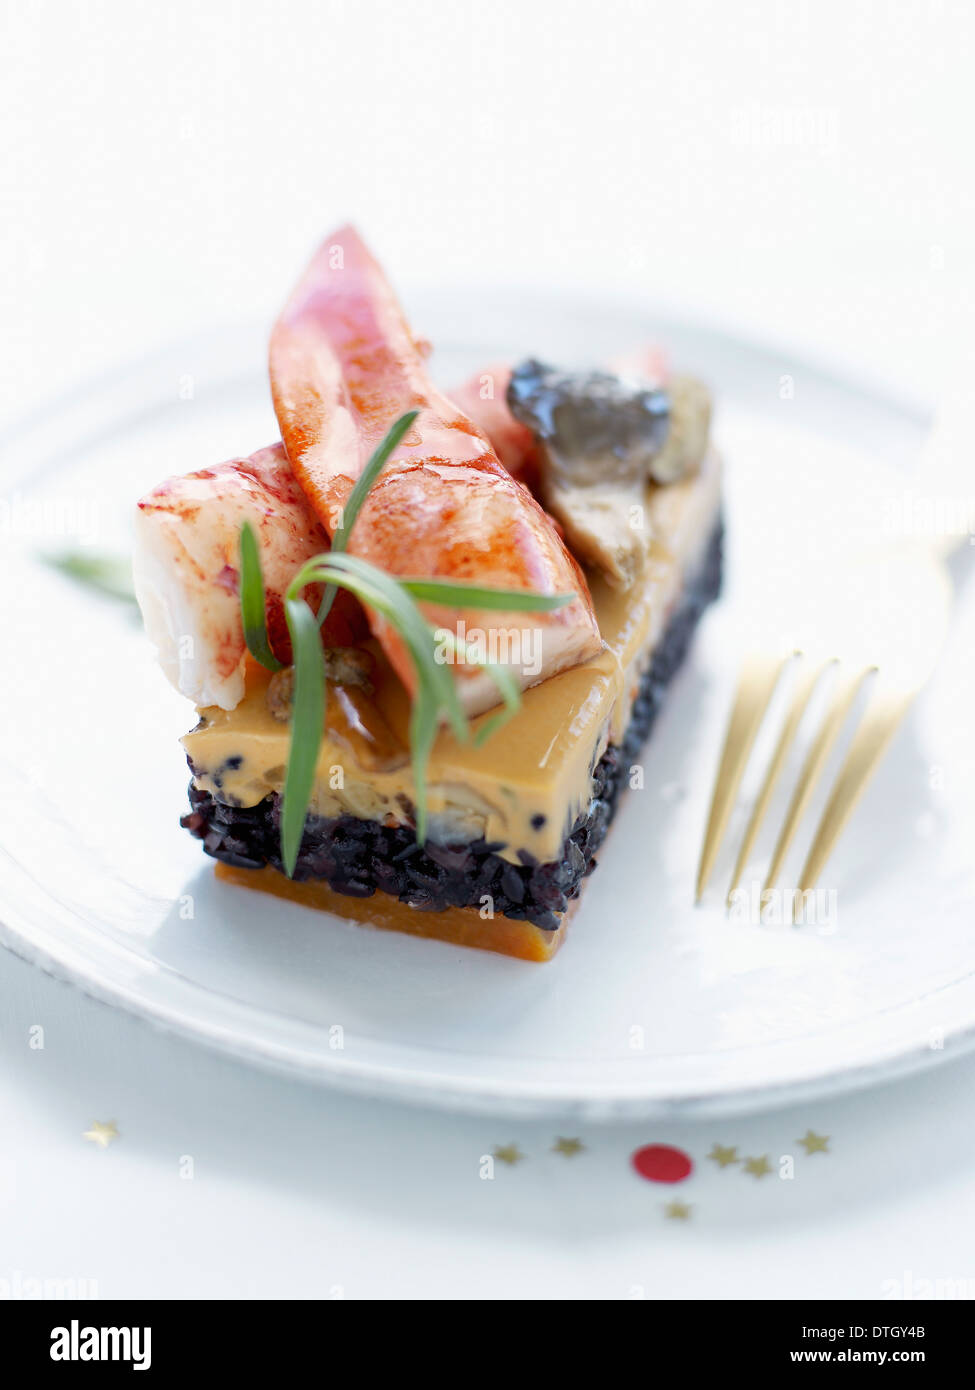 Squid ink risotto,cream of mushroom and lobster terrine Stock Photo